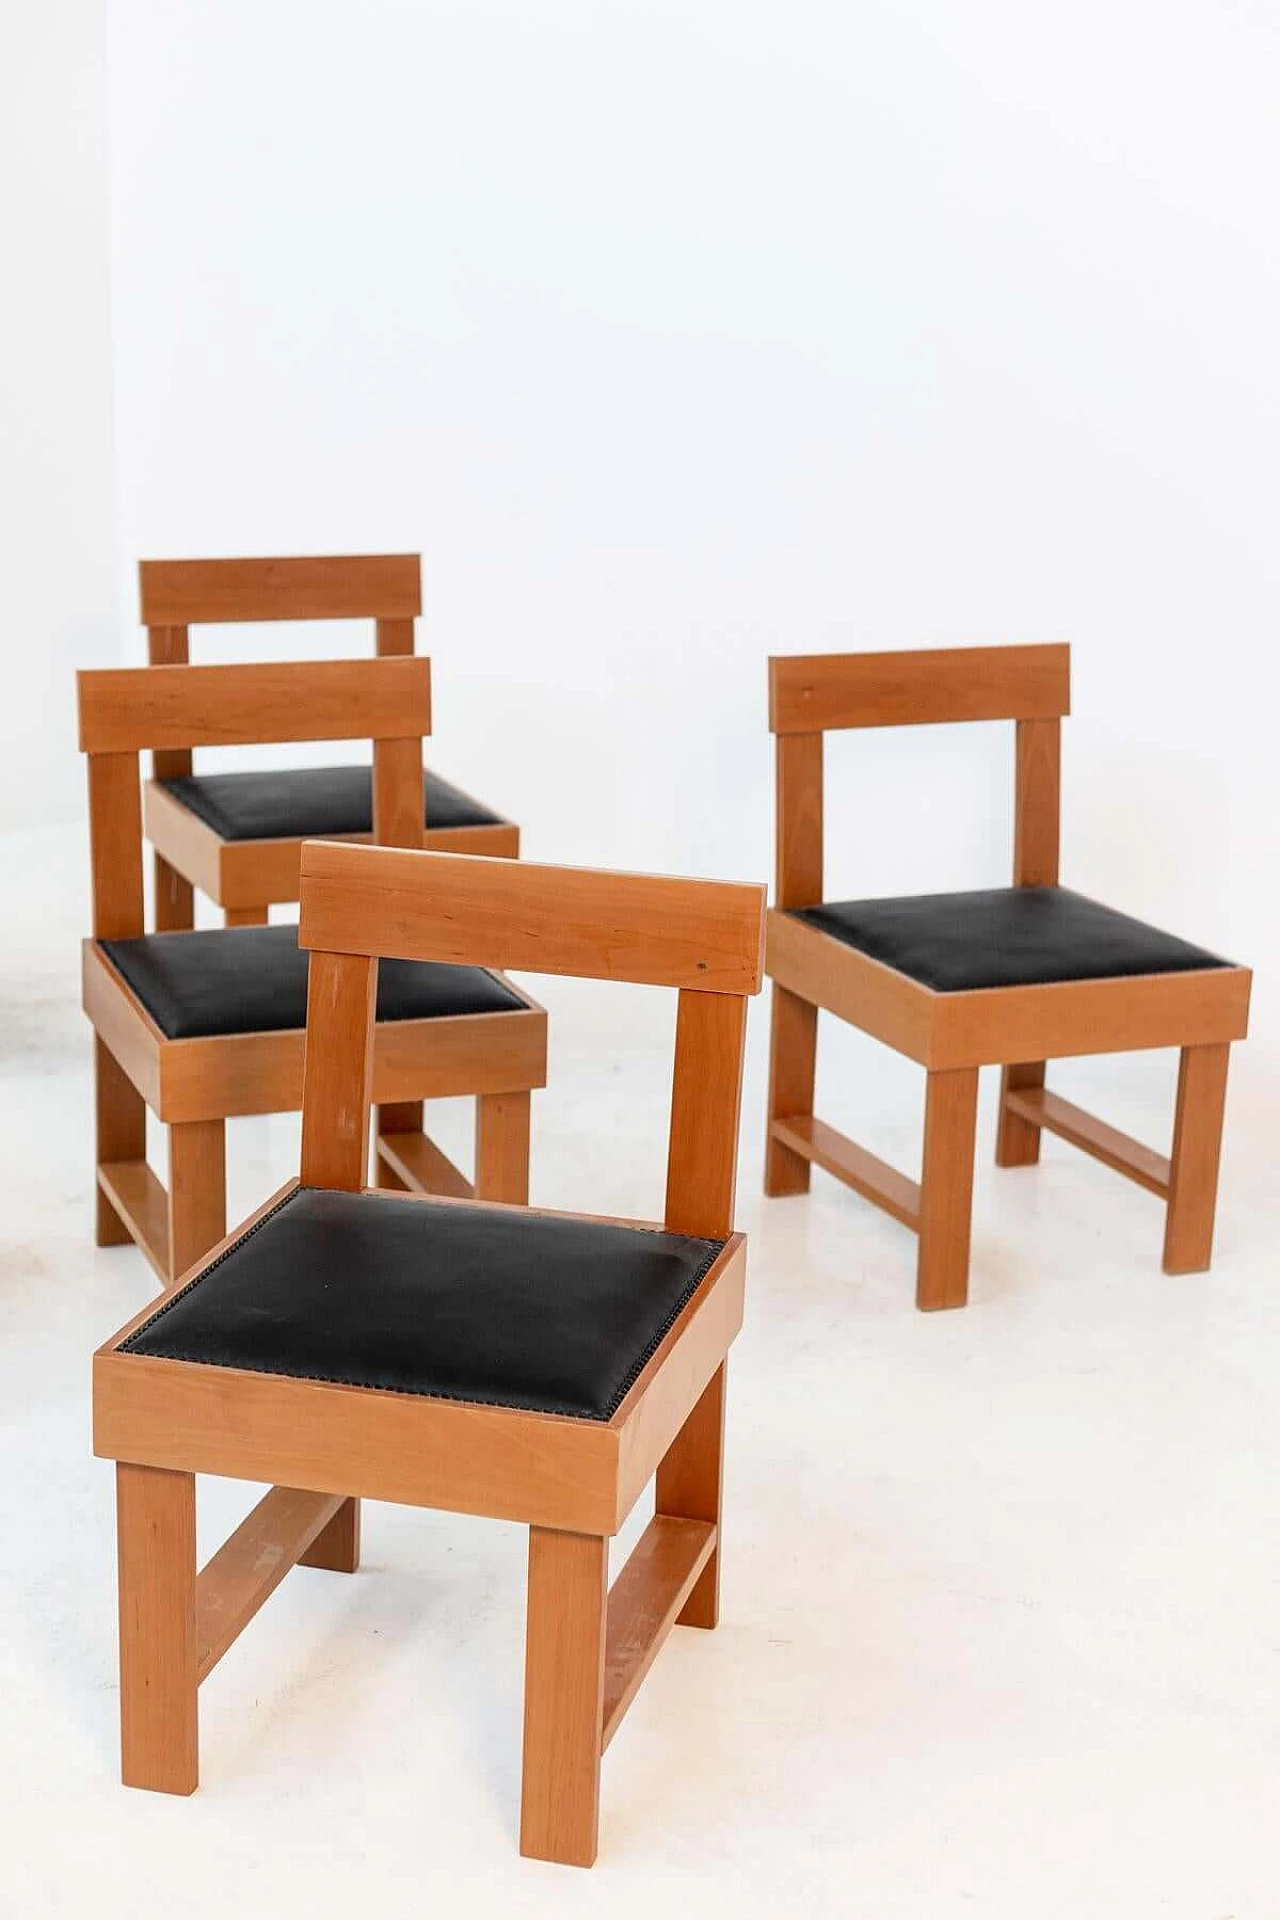 6 BBPR Studio chairs in wood and black leather, 1940s 1386837